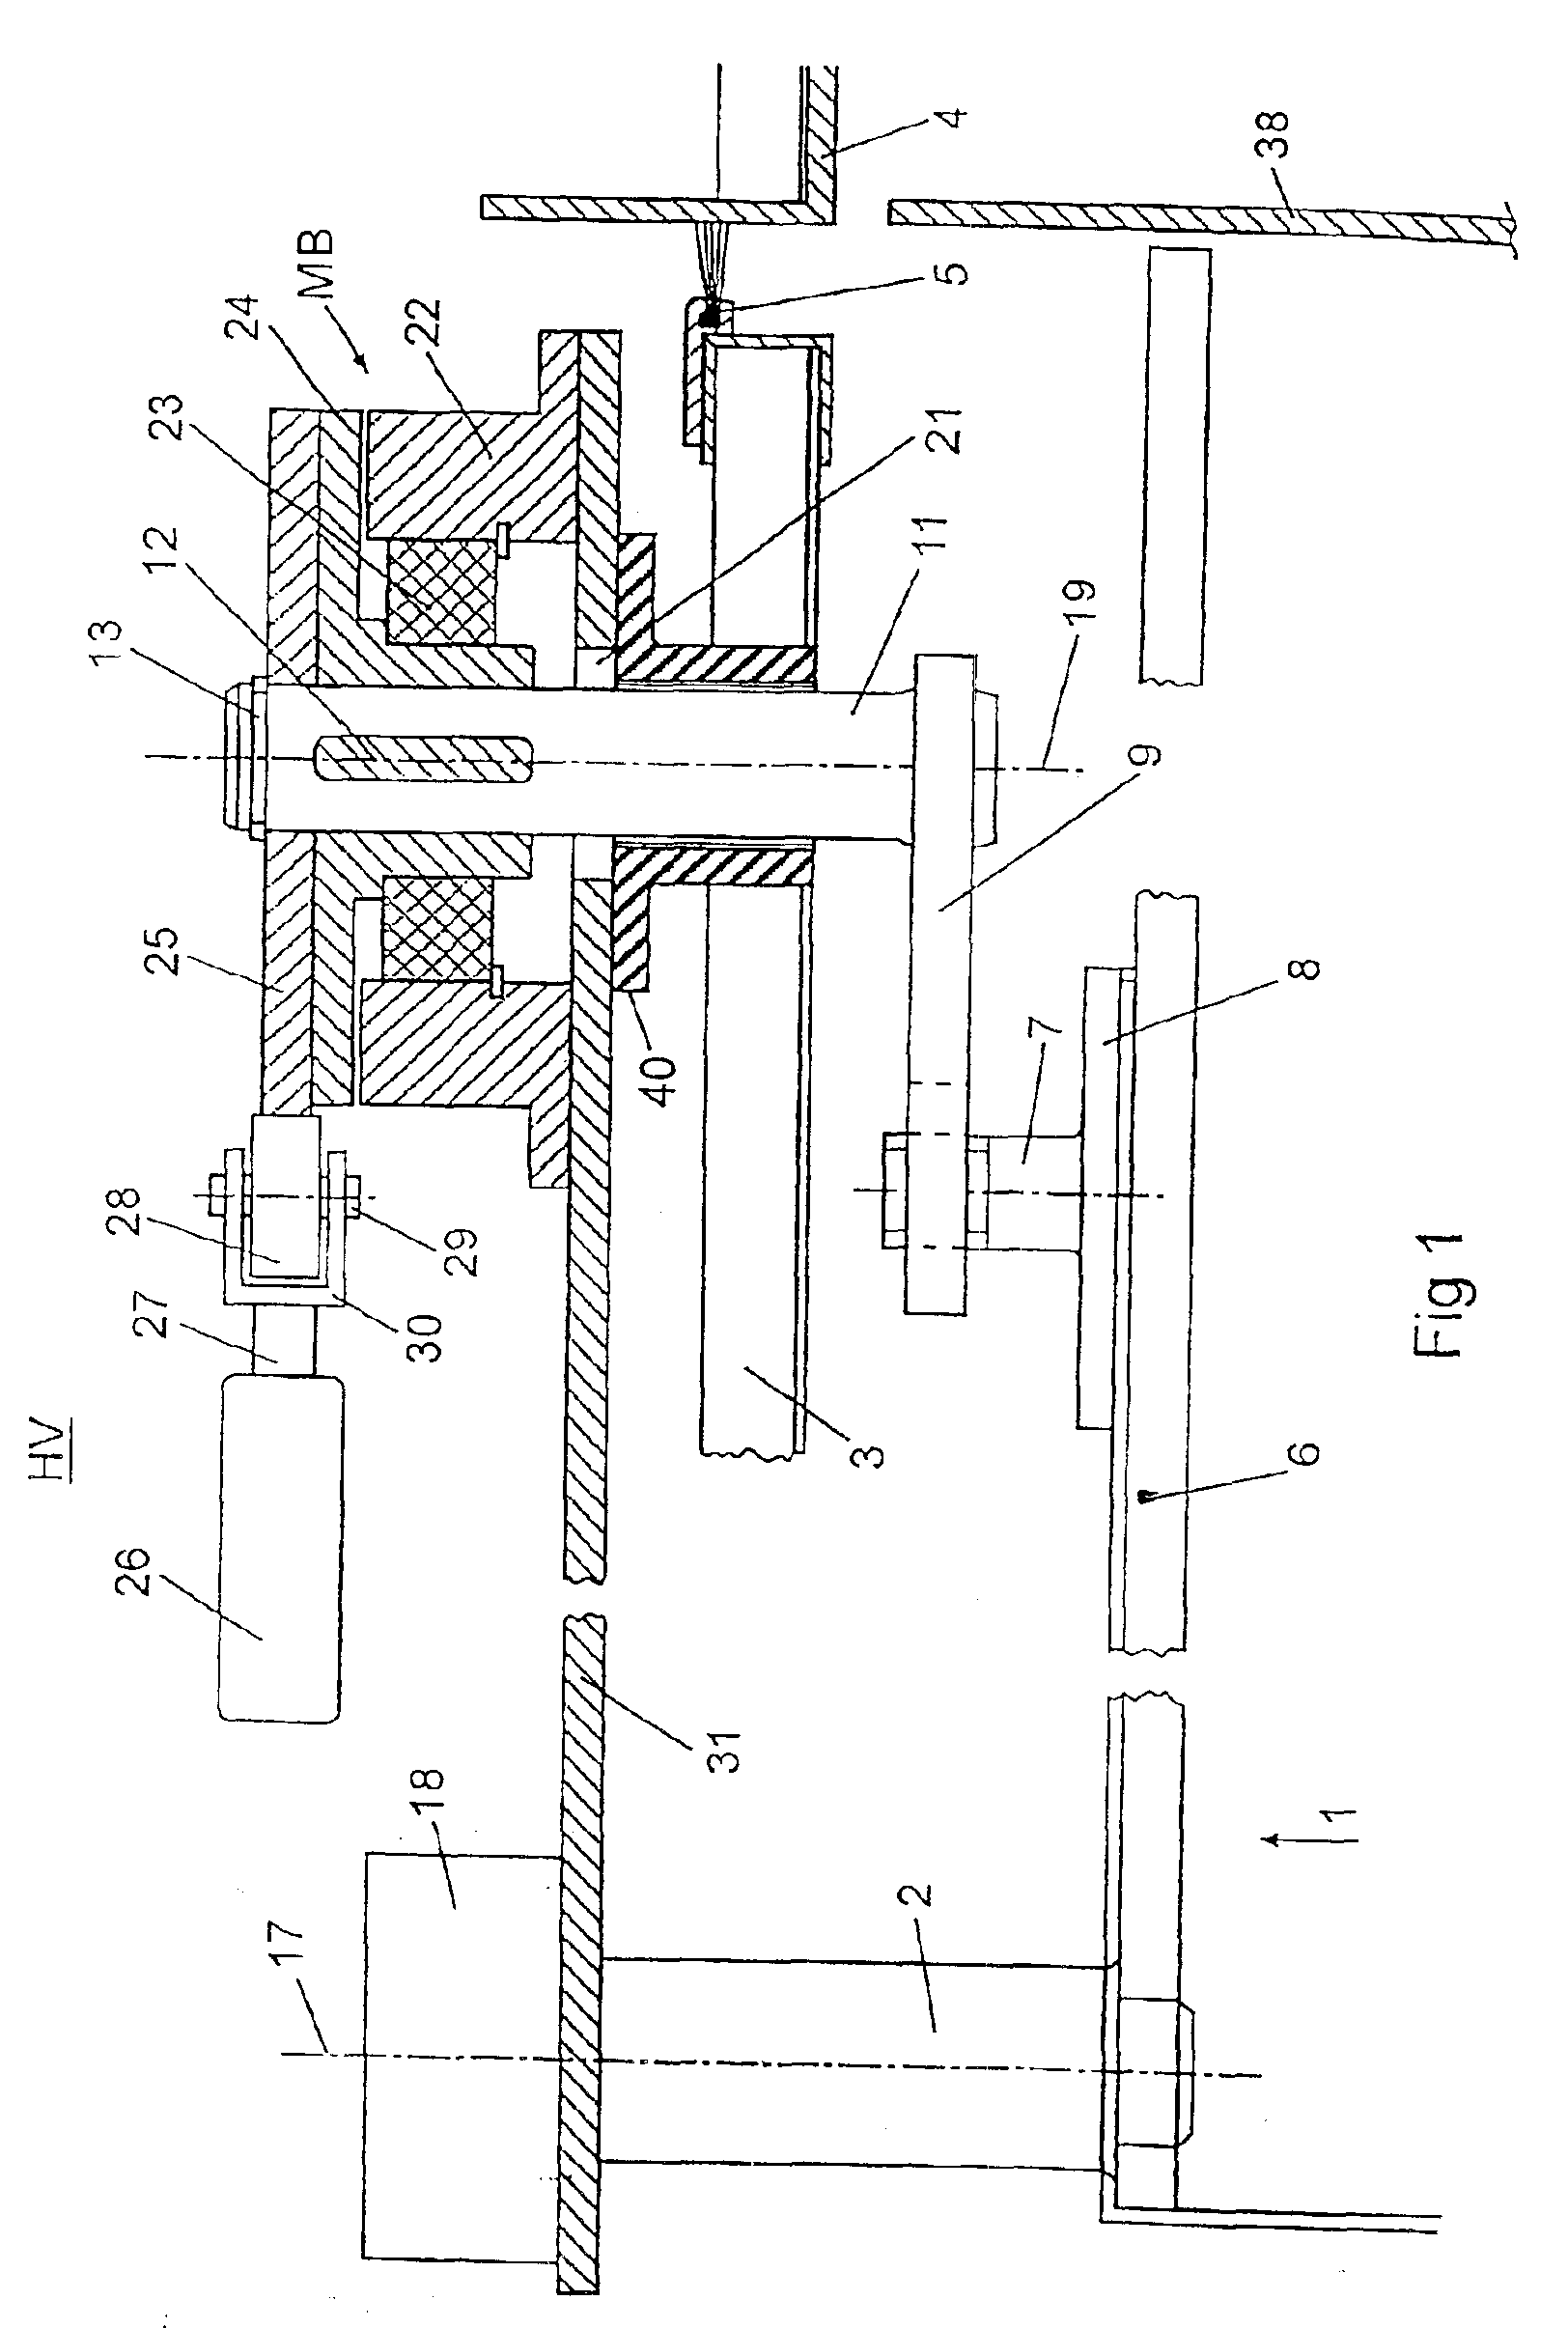 Device for securing a door leaf against unintentional deflection